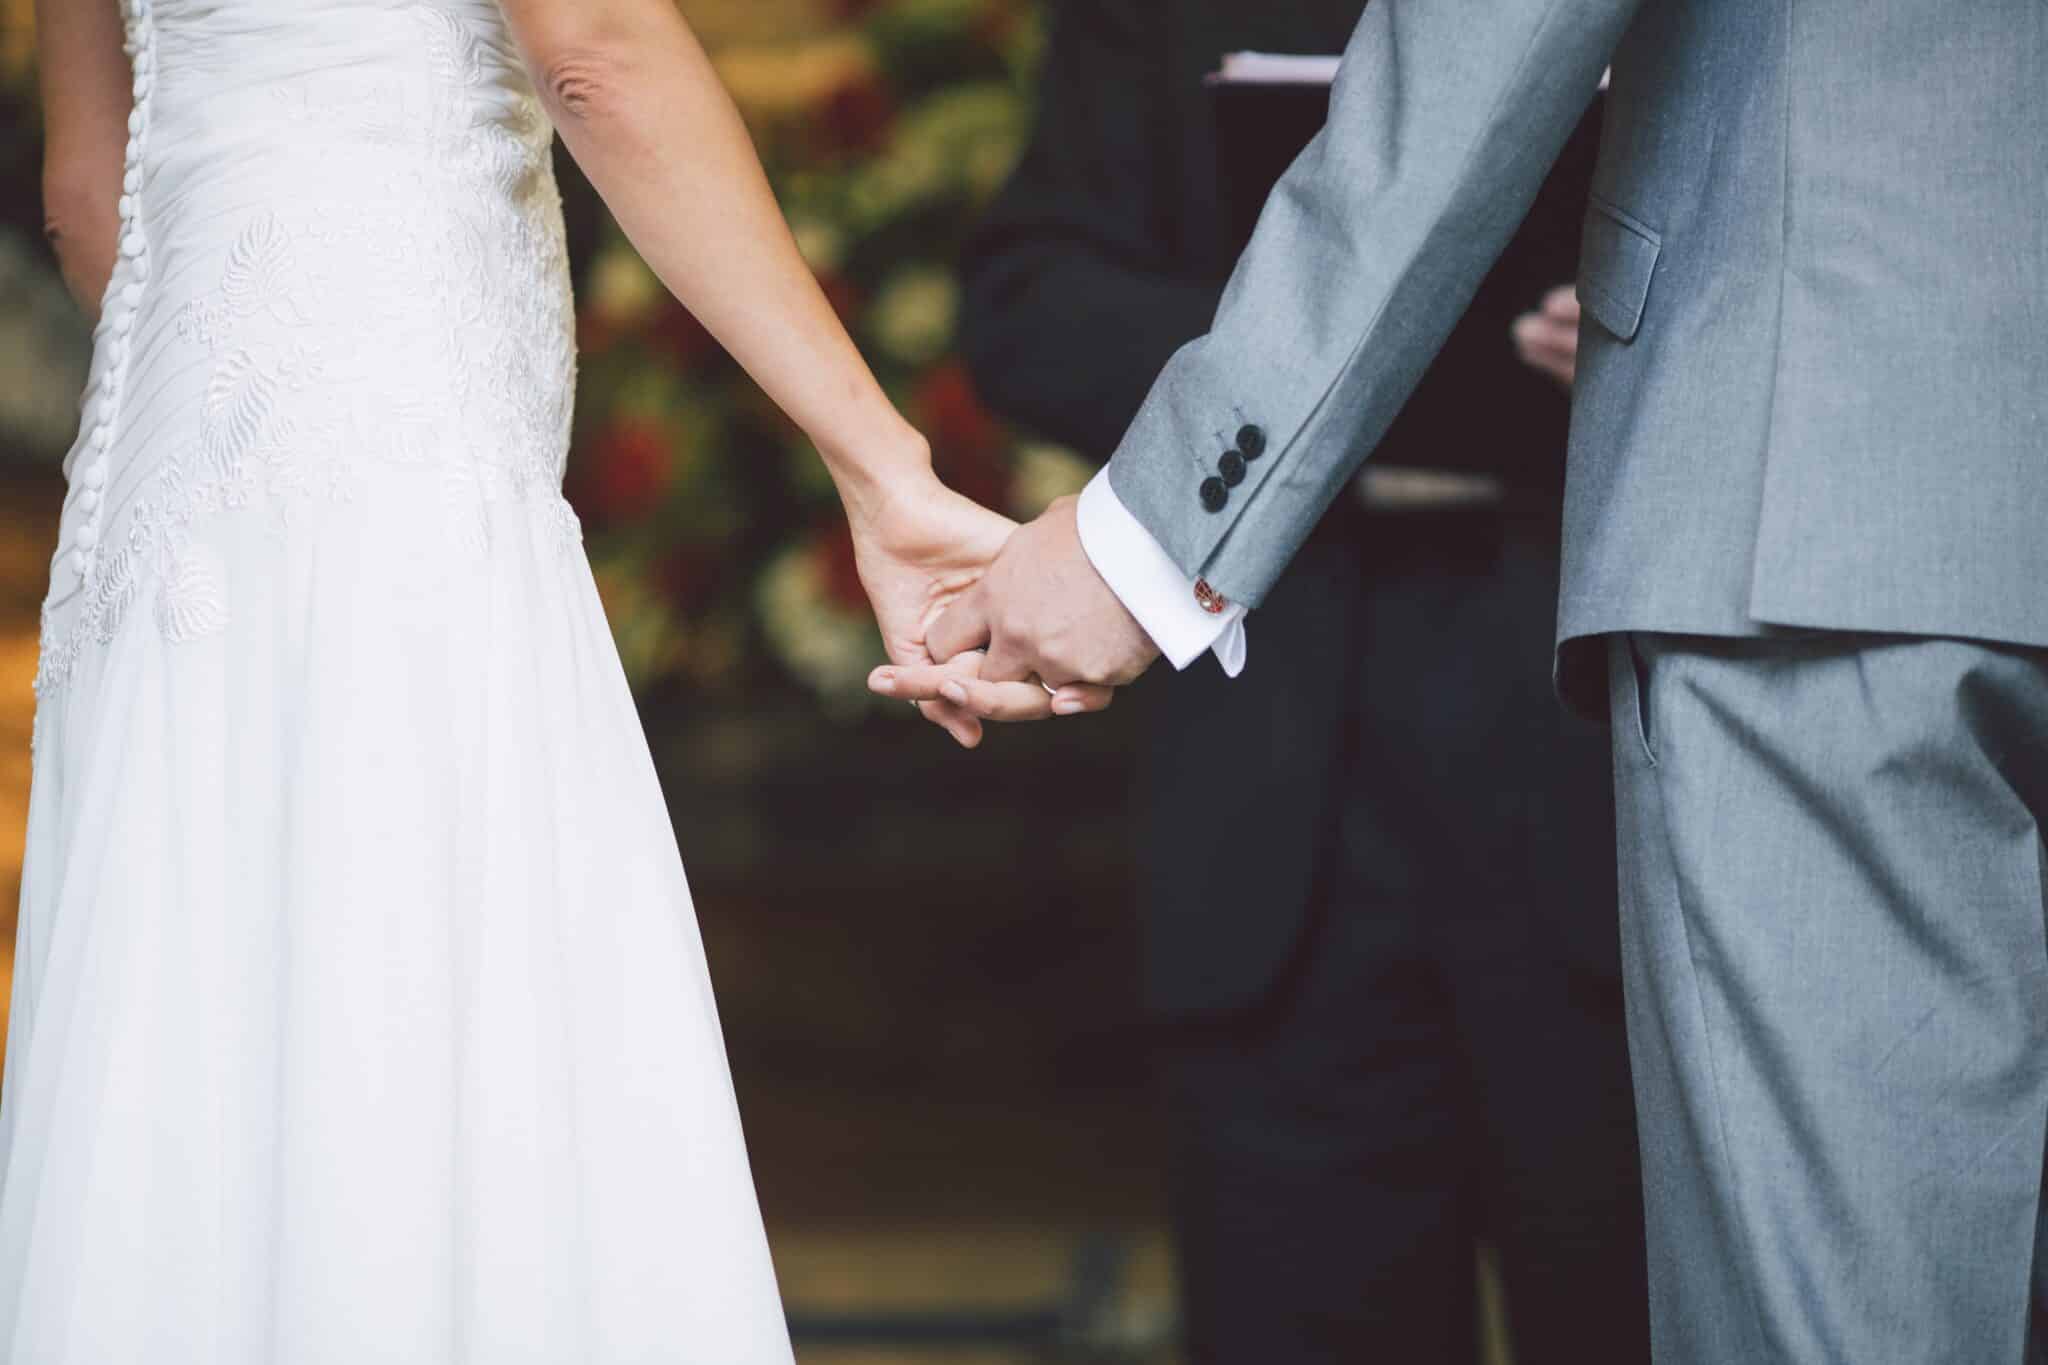 bride in white dress and groom in grey suit holding hands during wedding ceremony